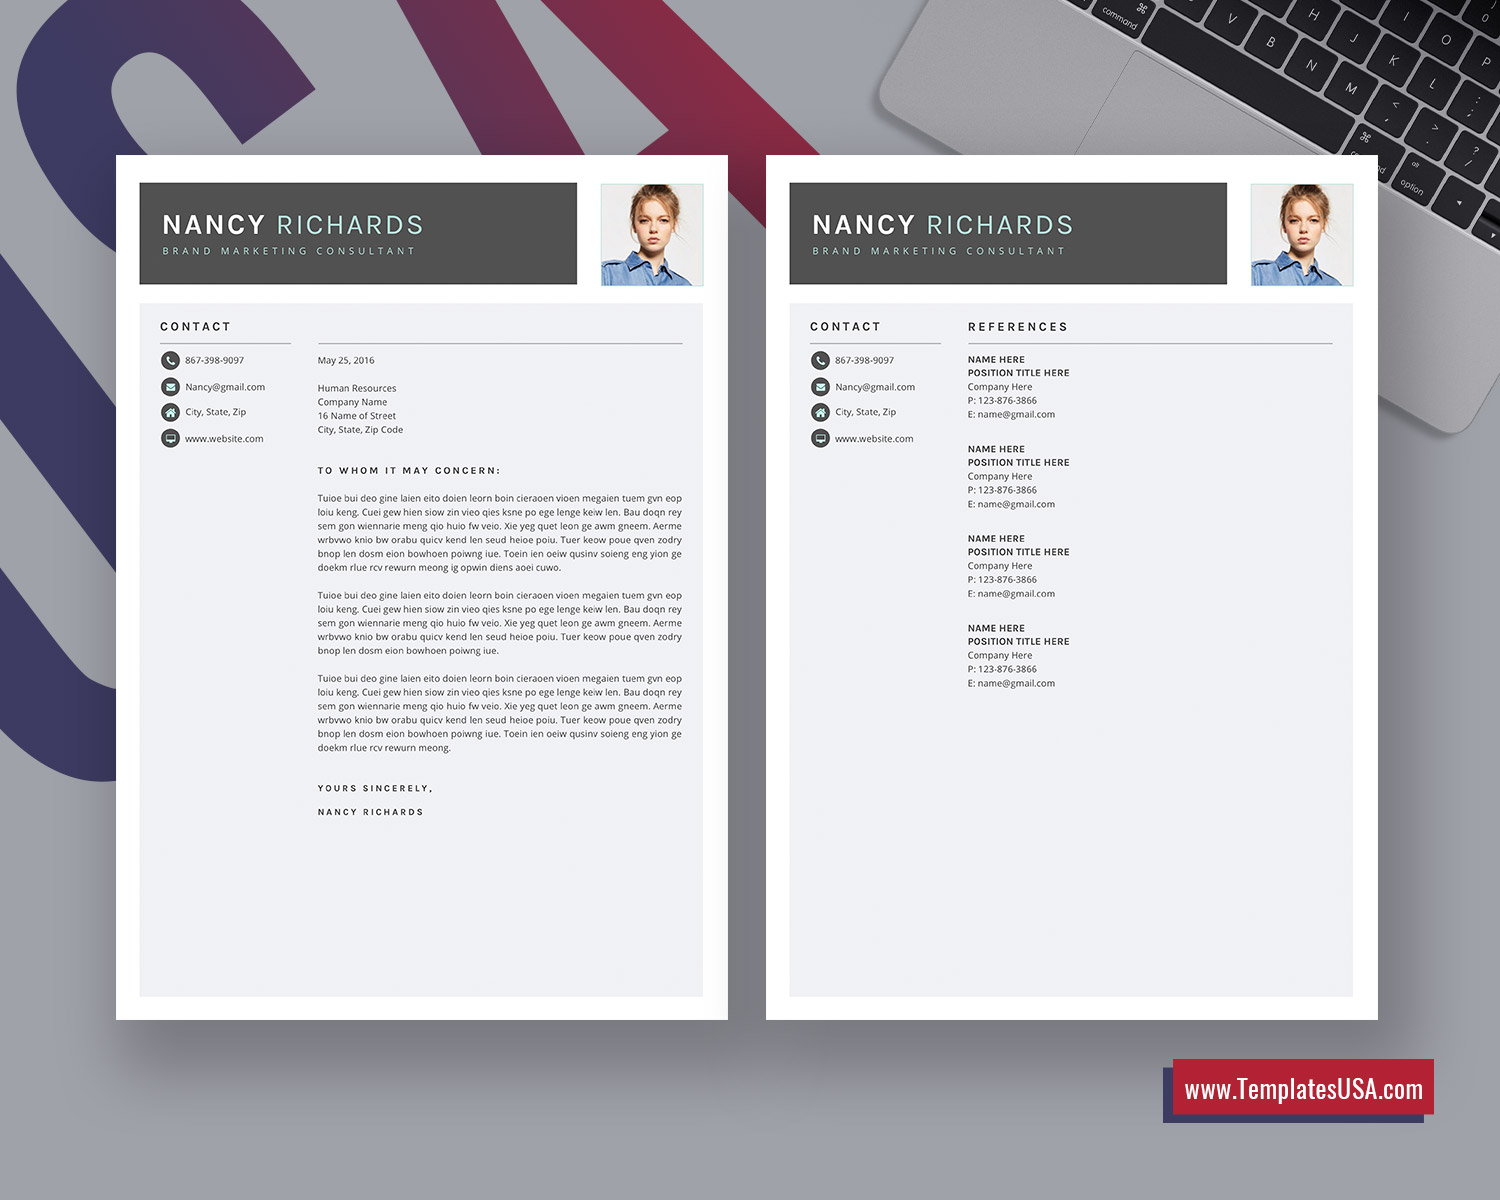 Modern Resume Template For Ms Word Creative Cv Template Professional Resume Format Unique Resume Editable Resume Design 1 3 Page Resume Template For Job Application Instant Download Templatesusa Com